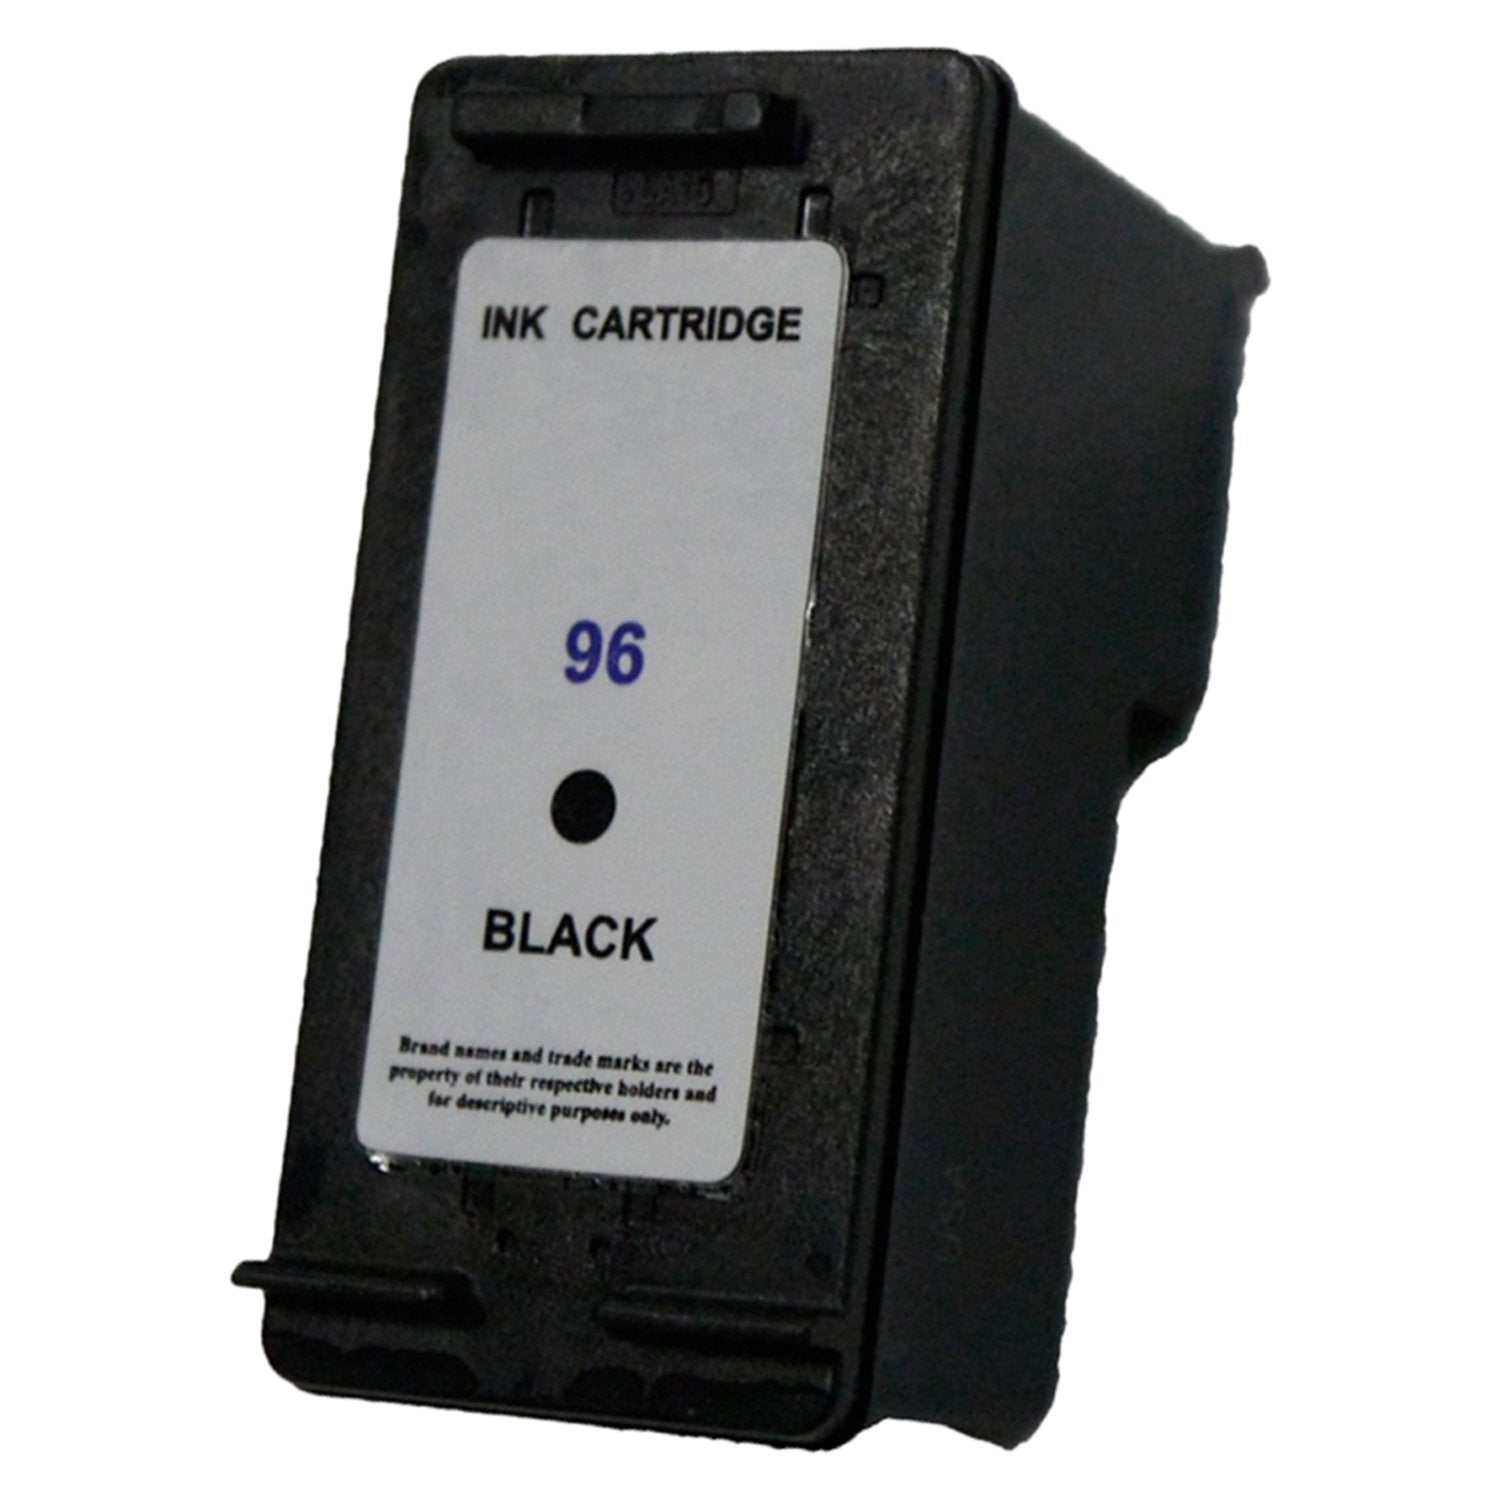 Absolute Toner Compatible C8767WN HP 96 Black Ink Cartridge | Absolute Toner HP Ink Cartridges